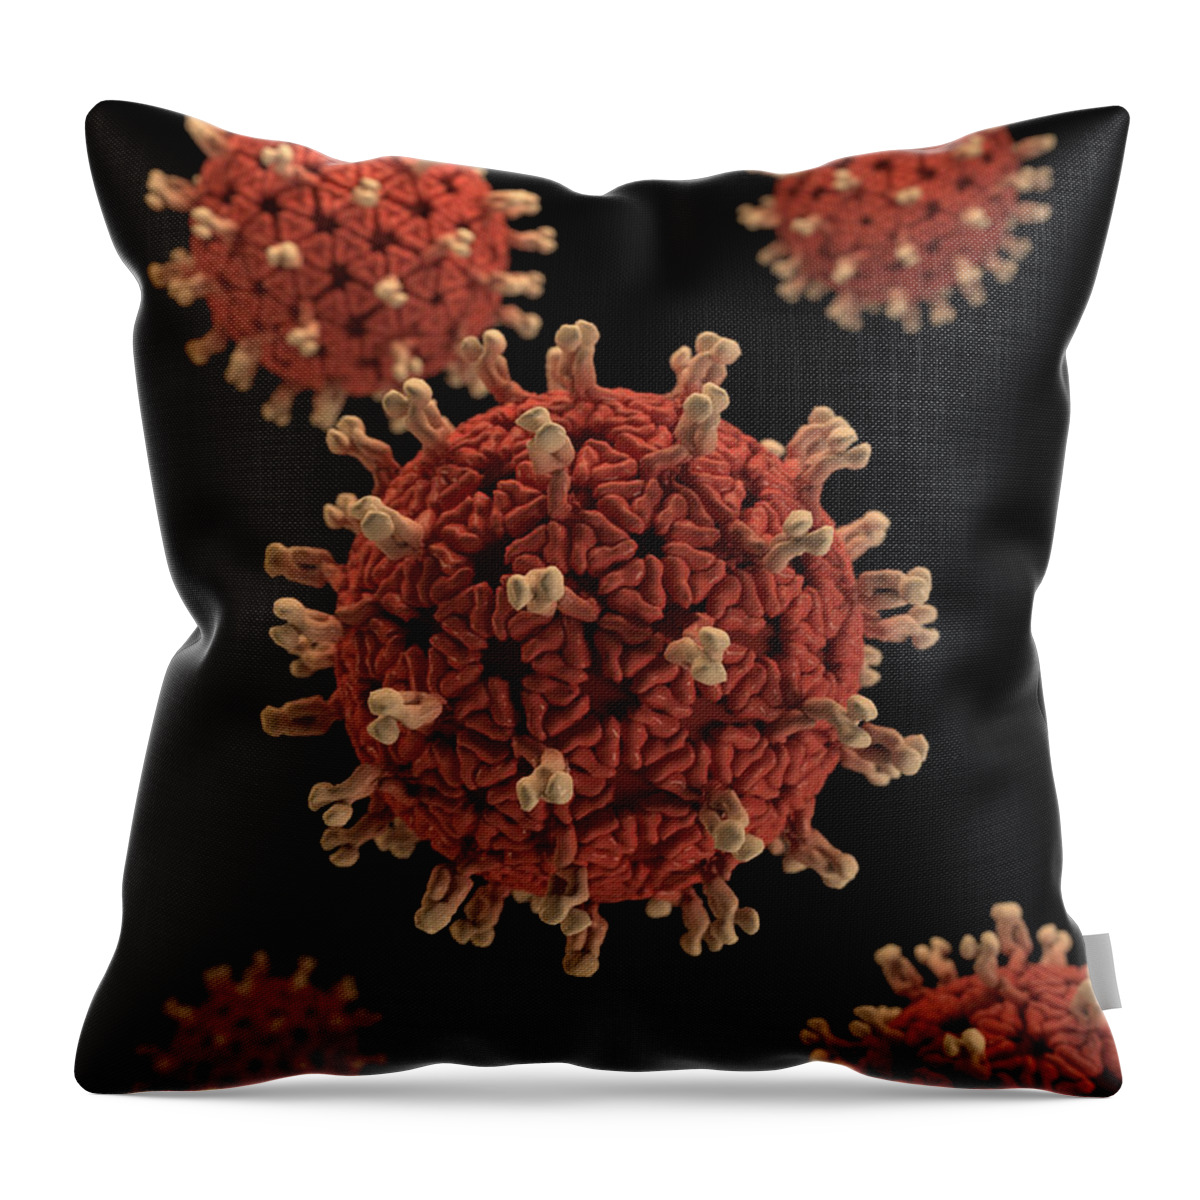 Science Throw Pillow featuring the photograph Rotavirus, 3d Model by Science Source